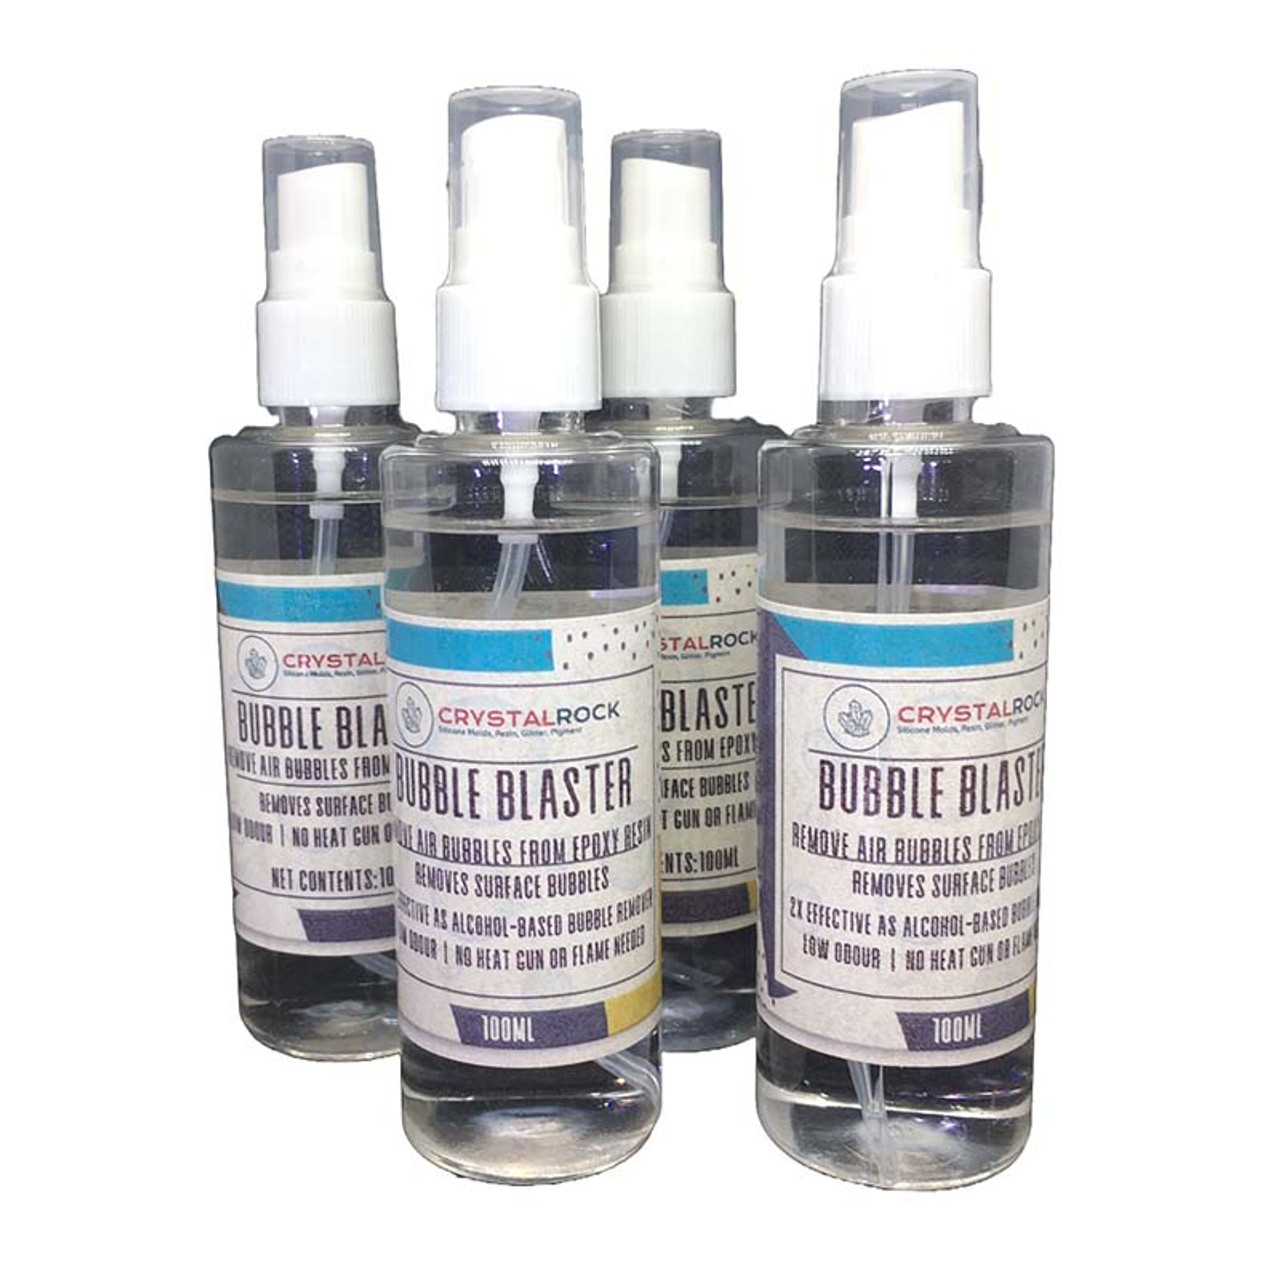 Resin Bubble Remover Spray - 100ml, Pack of 1